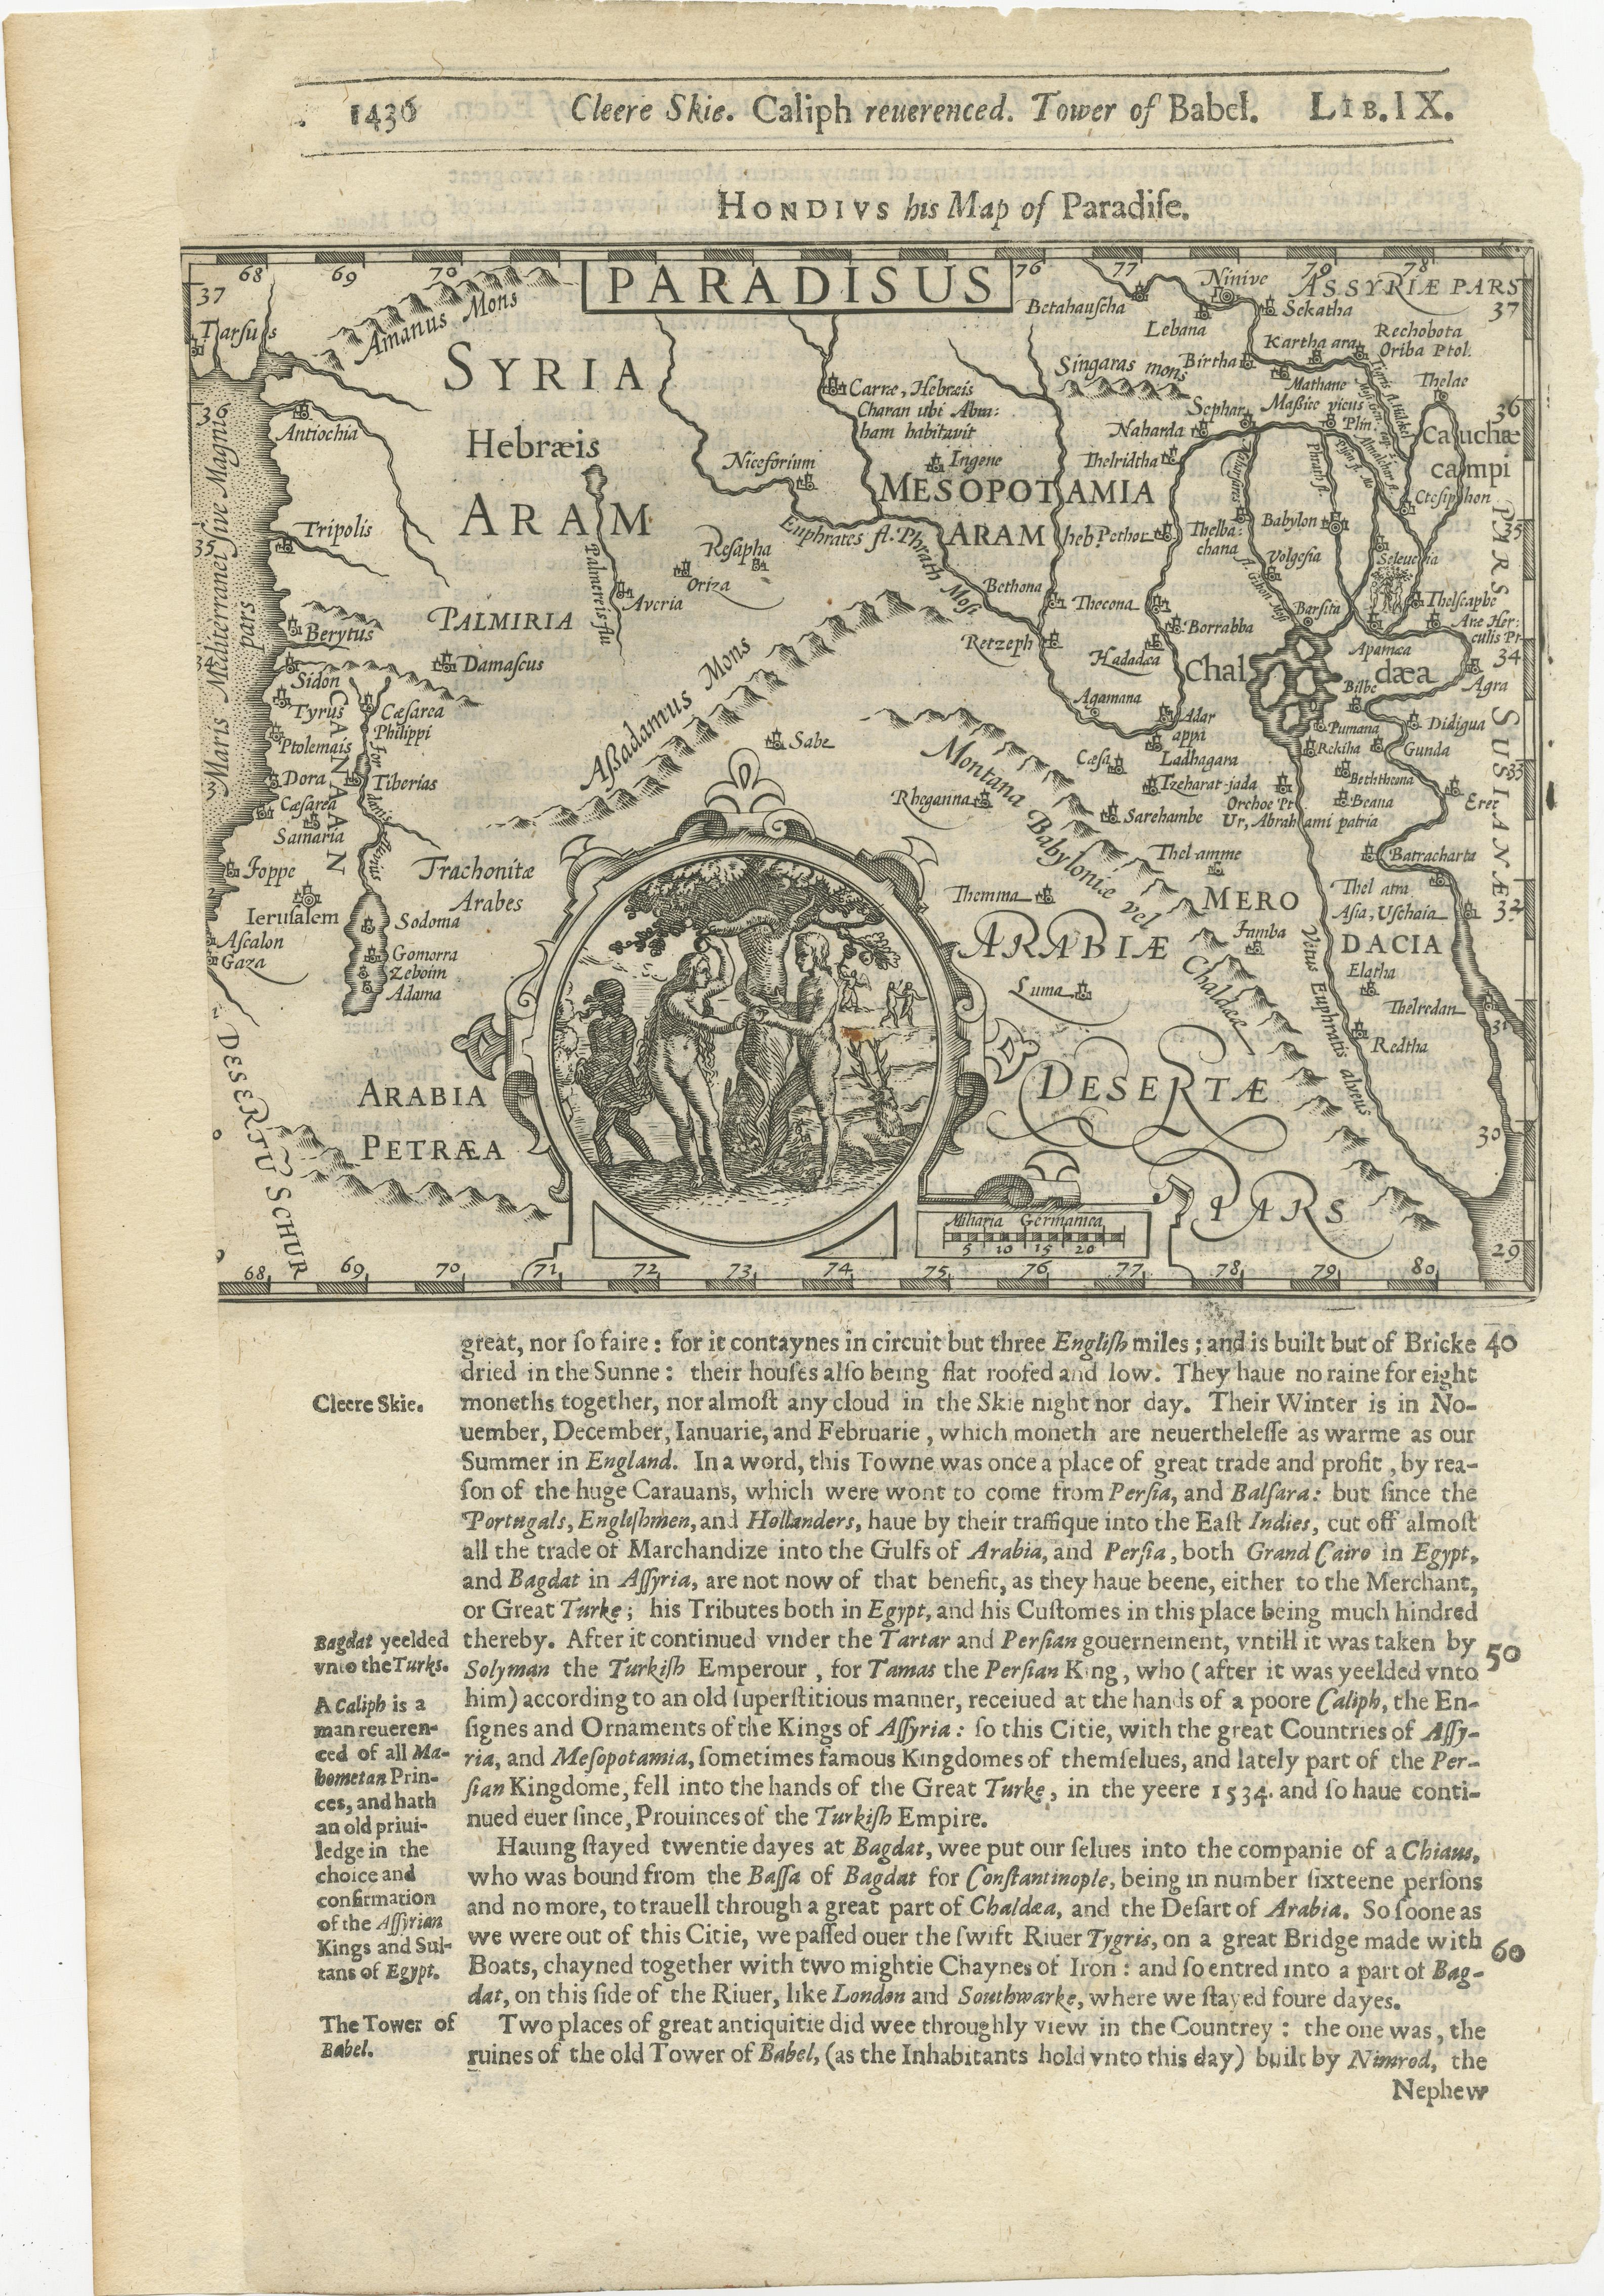 Antique map titled 'Hondius his Map of Paradise'. Beautiful map of the region bounded by the Holy Land. Syria, Mesopotamia, Chaldea and part of Arabia. With decorative vignette of the Garden of Eden. Originates from the 1625-26 edition of 'Purchas